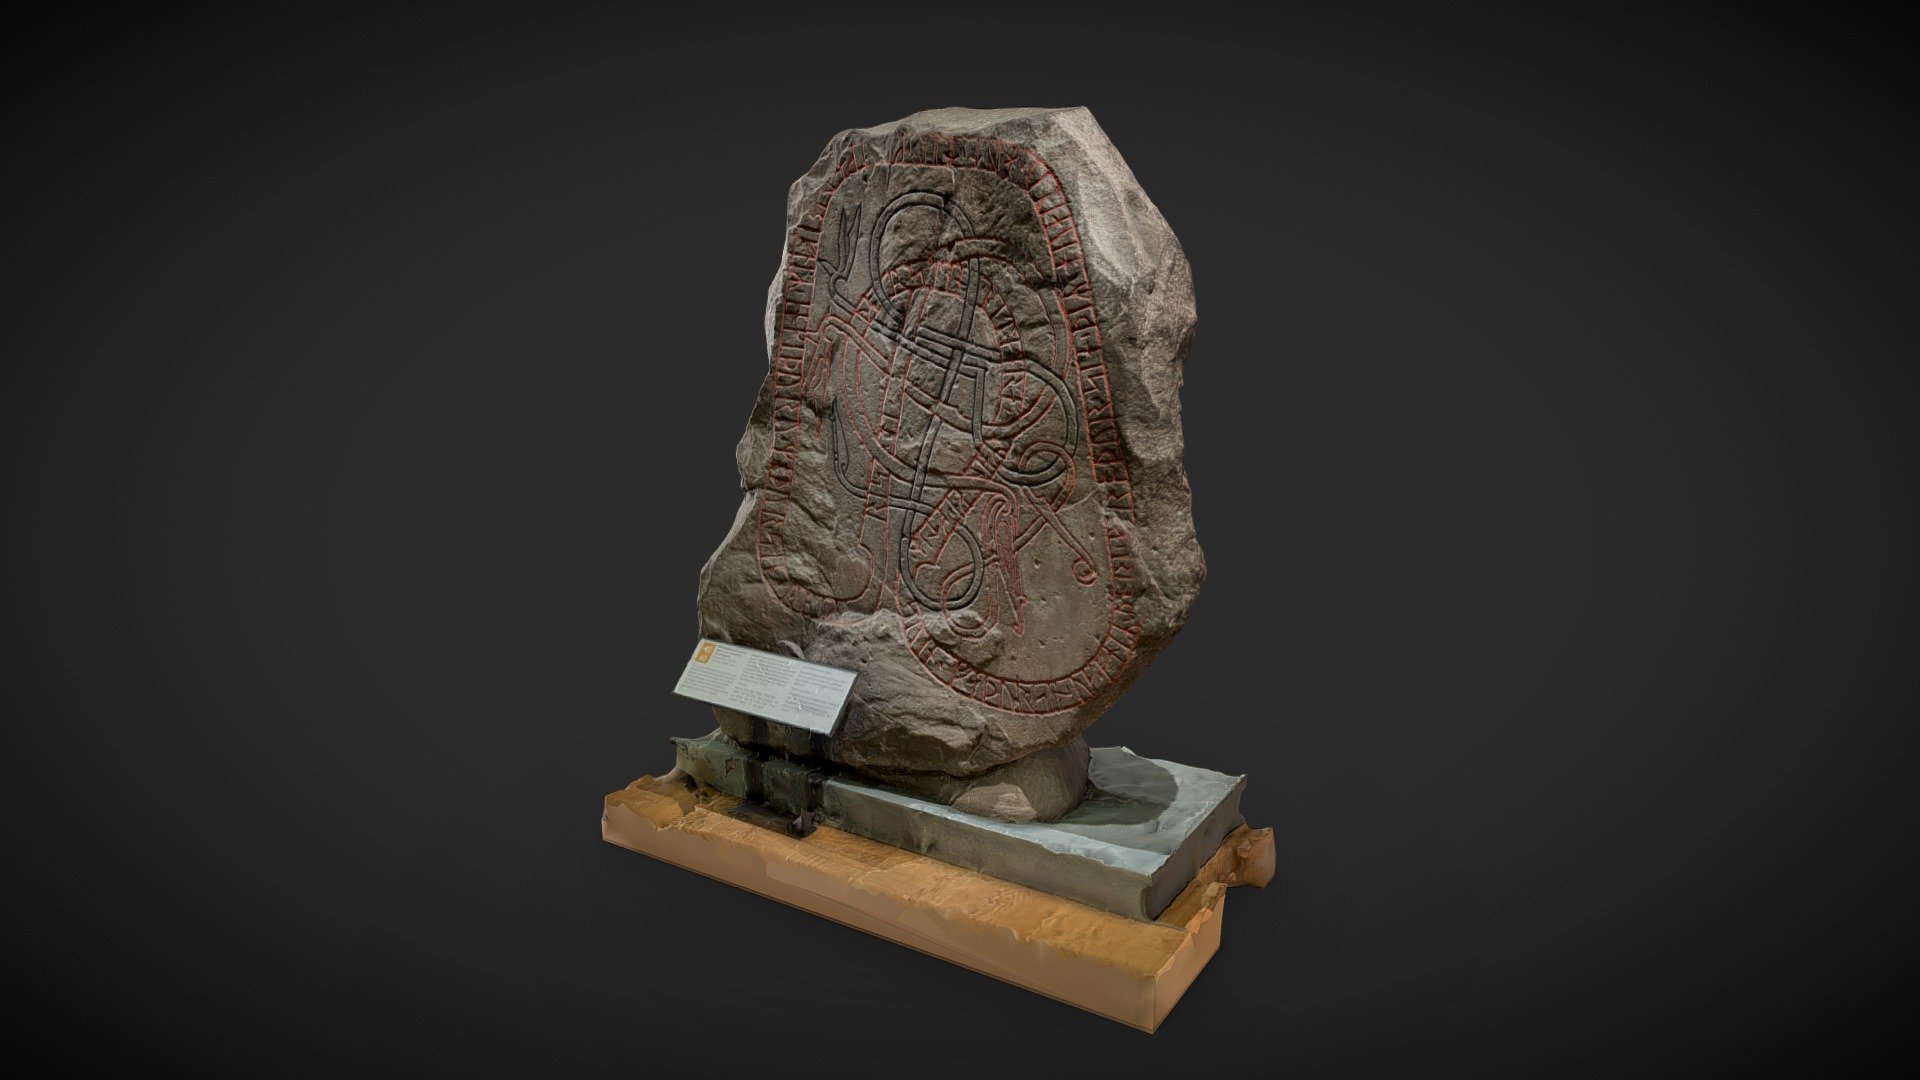 200 images processed in RealityScan via venue wi-fi at the Ashmolean Musuem, Oxford. Capture started at 13:08, ready for editing on Sketchfab at 13:43 👌✨



The large freestanding Runestone from Sweden is a classic example of how writing preserves extraordinary stories from the past. This monument, carved around AD 1050 to 1100, is a memorial to a father and son who were Scandinavian mercenaries in the service of the Byzantine emperor in Greece.
~https://www.ashmolean.org/reading-and-writing-gallery


Online collection record:
https://collections.ashmolean.org/collection/search/per_page/25/offset/0/sort_by/relevance/object/24539 - Monumental Rune Stone #RealityScan - 3D model by Thomas Flynn (@nebulousflynn) 3d model